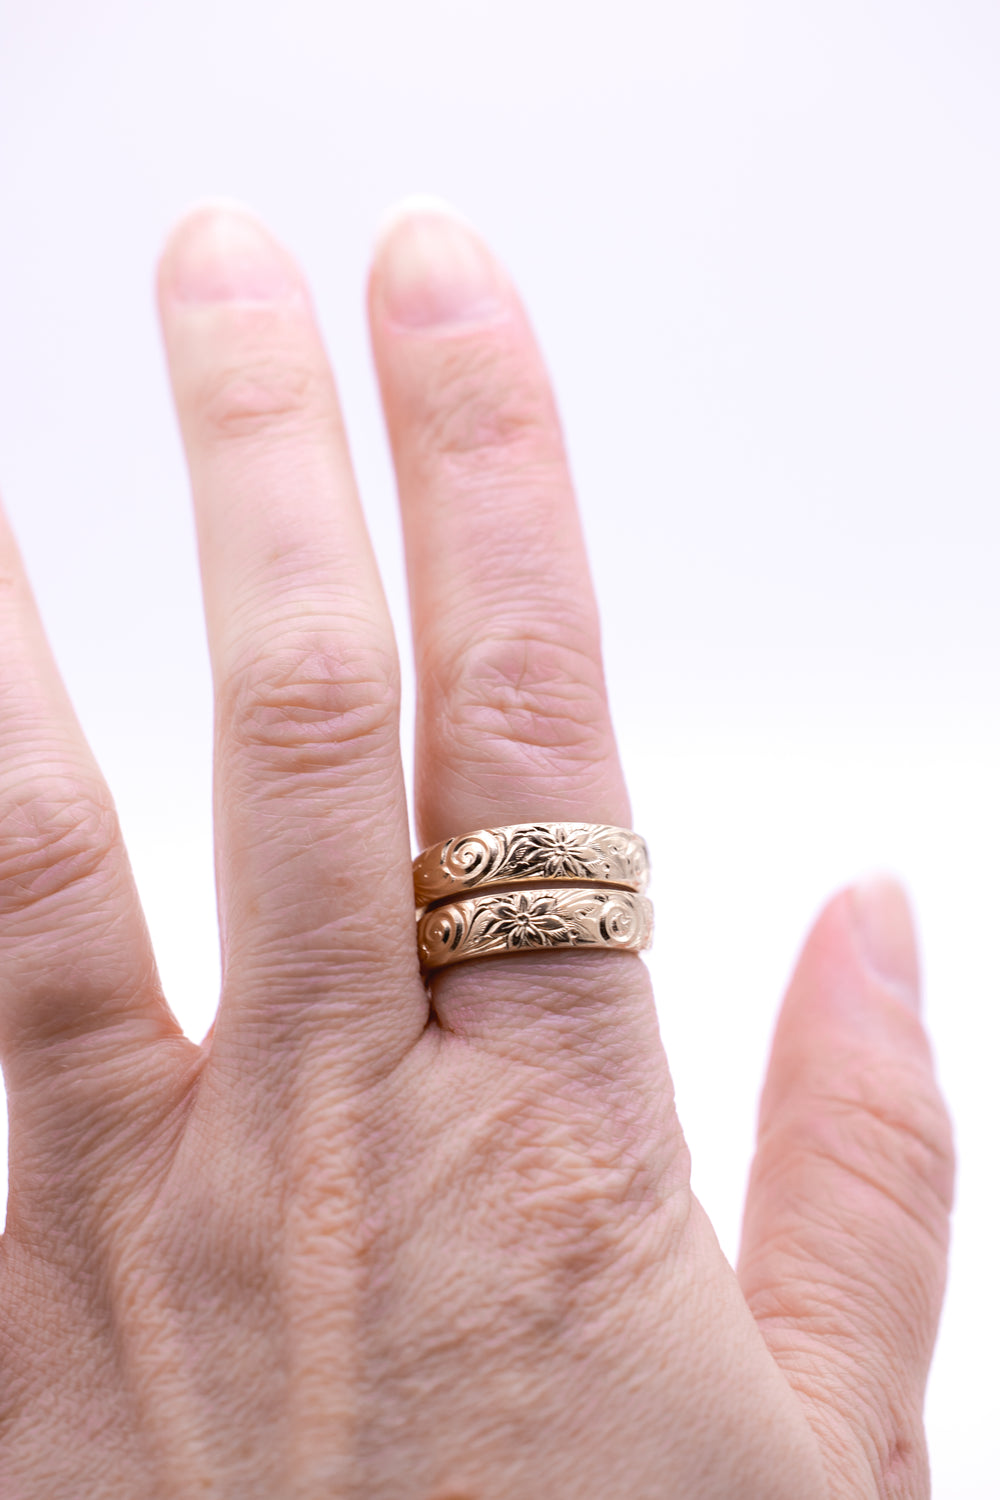 Gold Floral wrap ring by Anna Shae Jewelry in Lexington, Kentucky